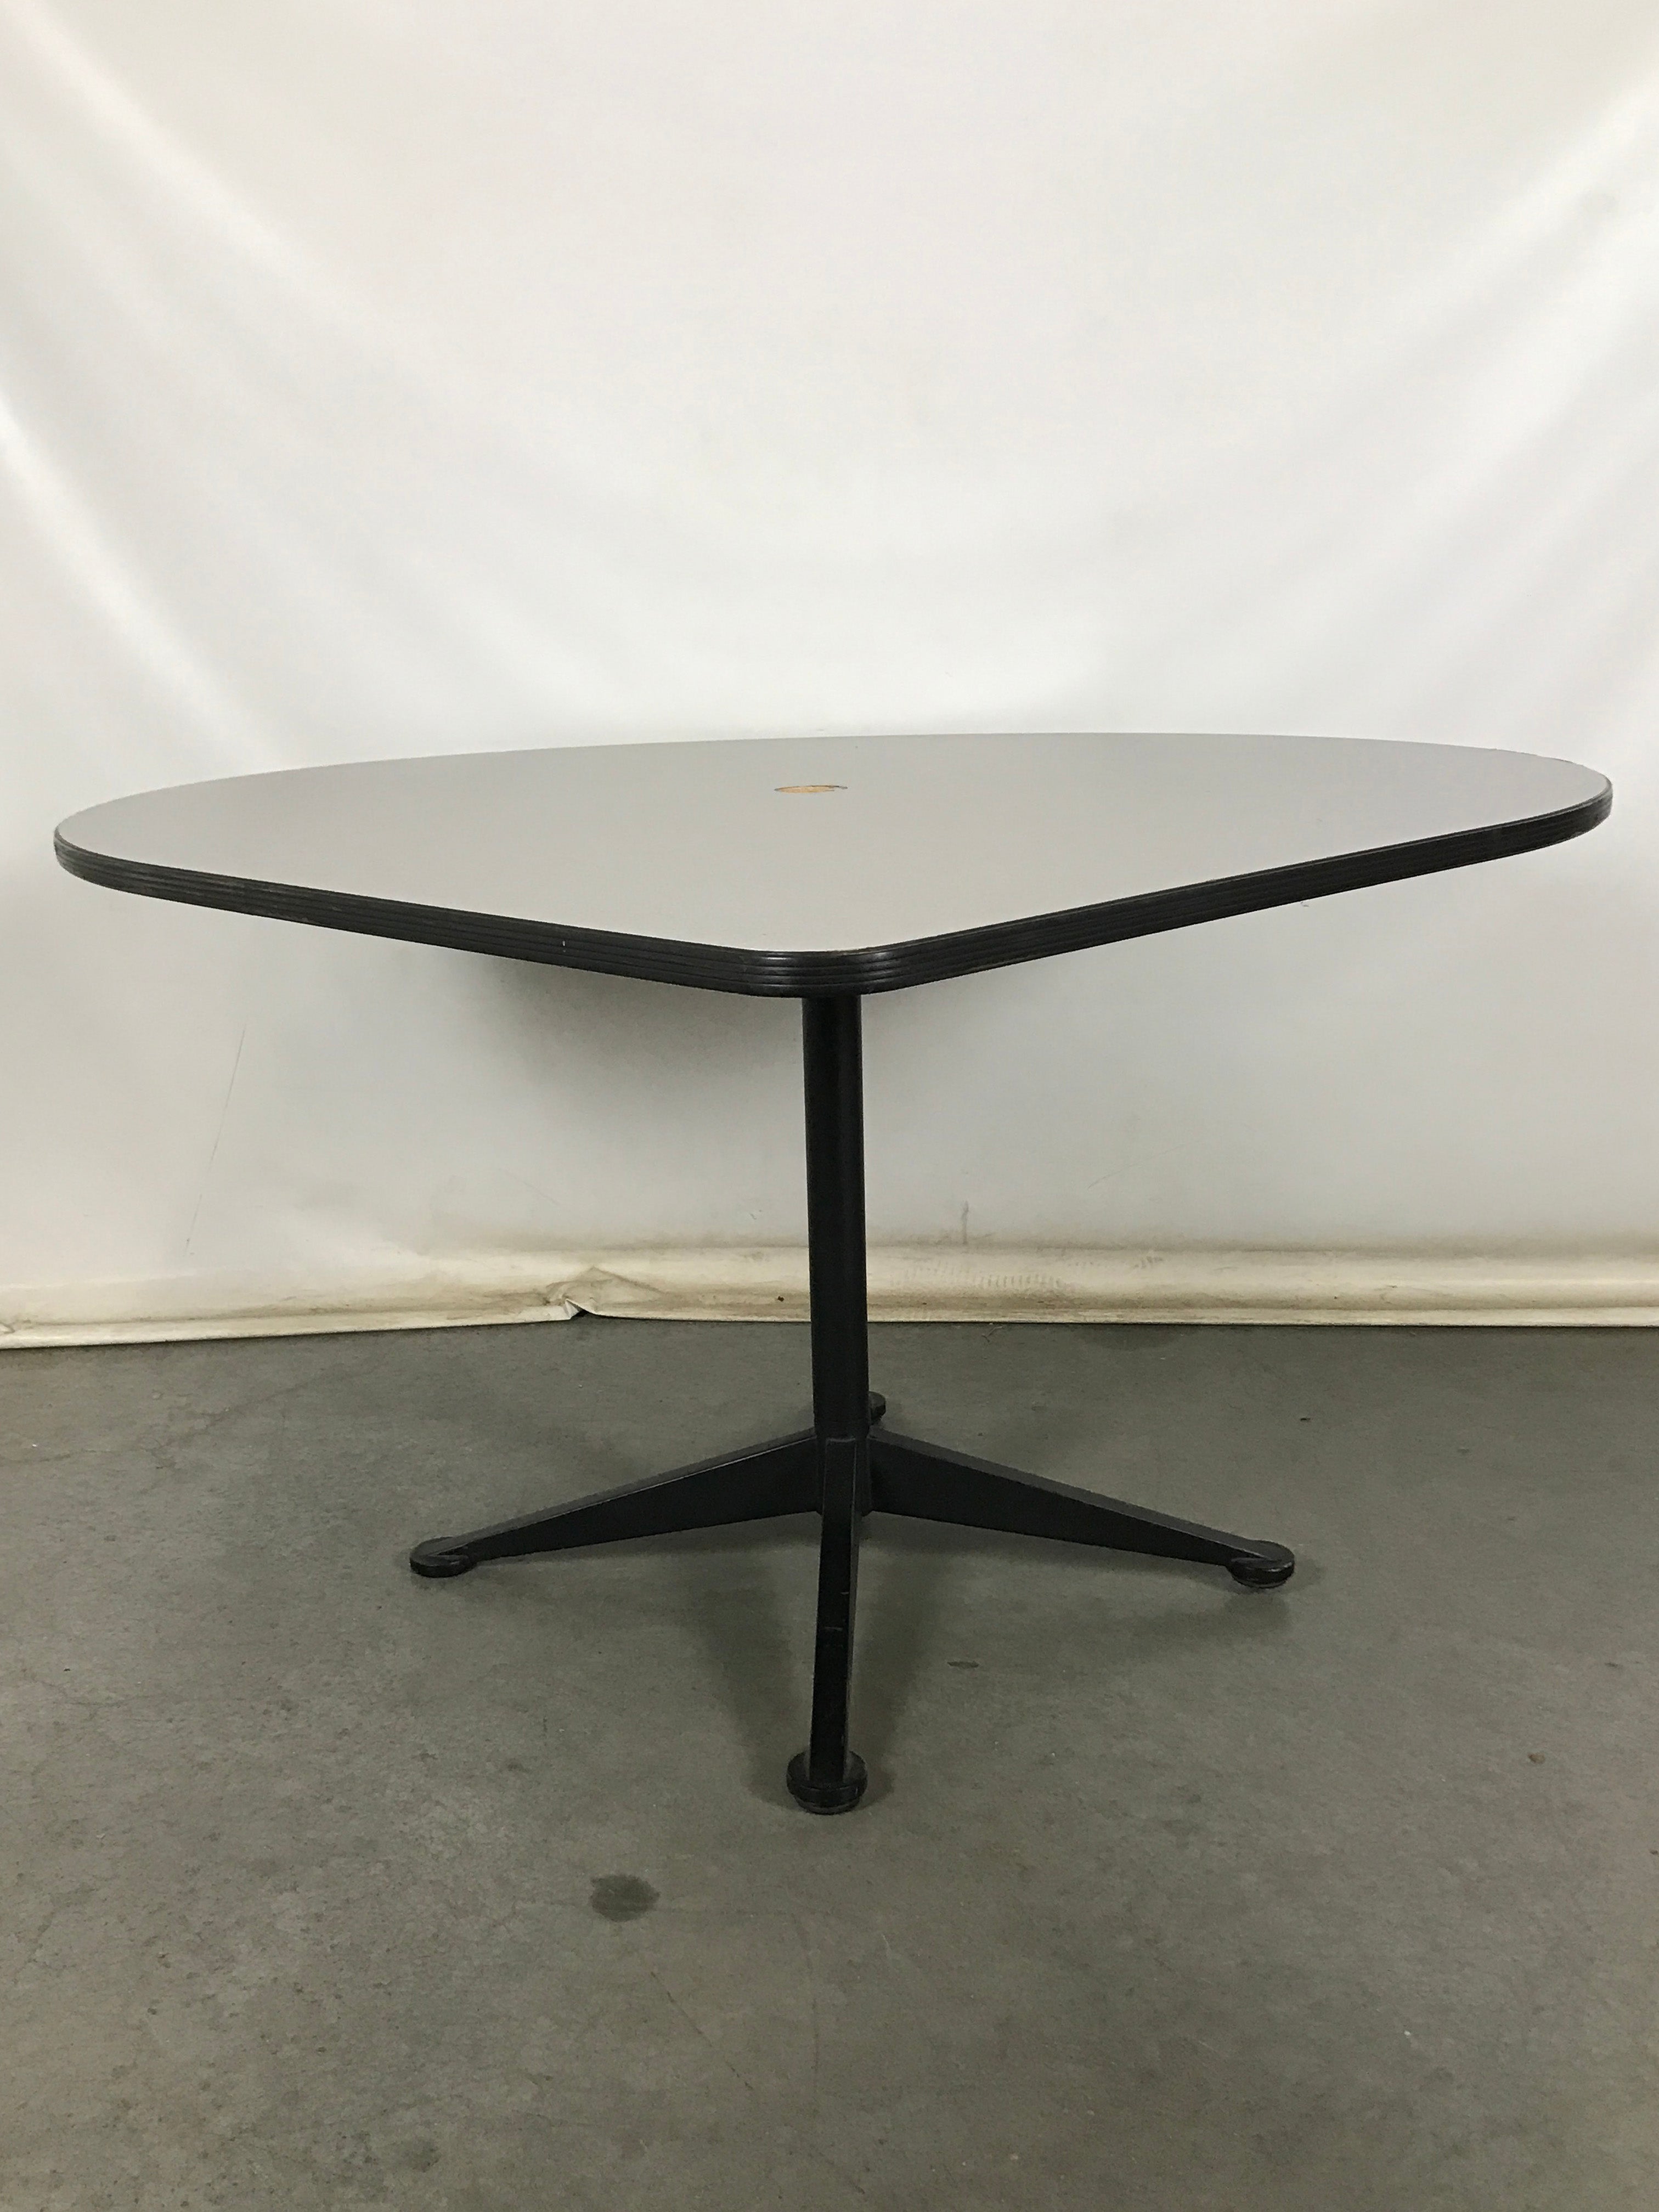 Gray Wooden Table With Black Metal Frame